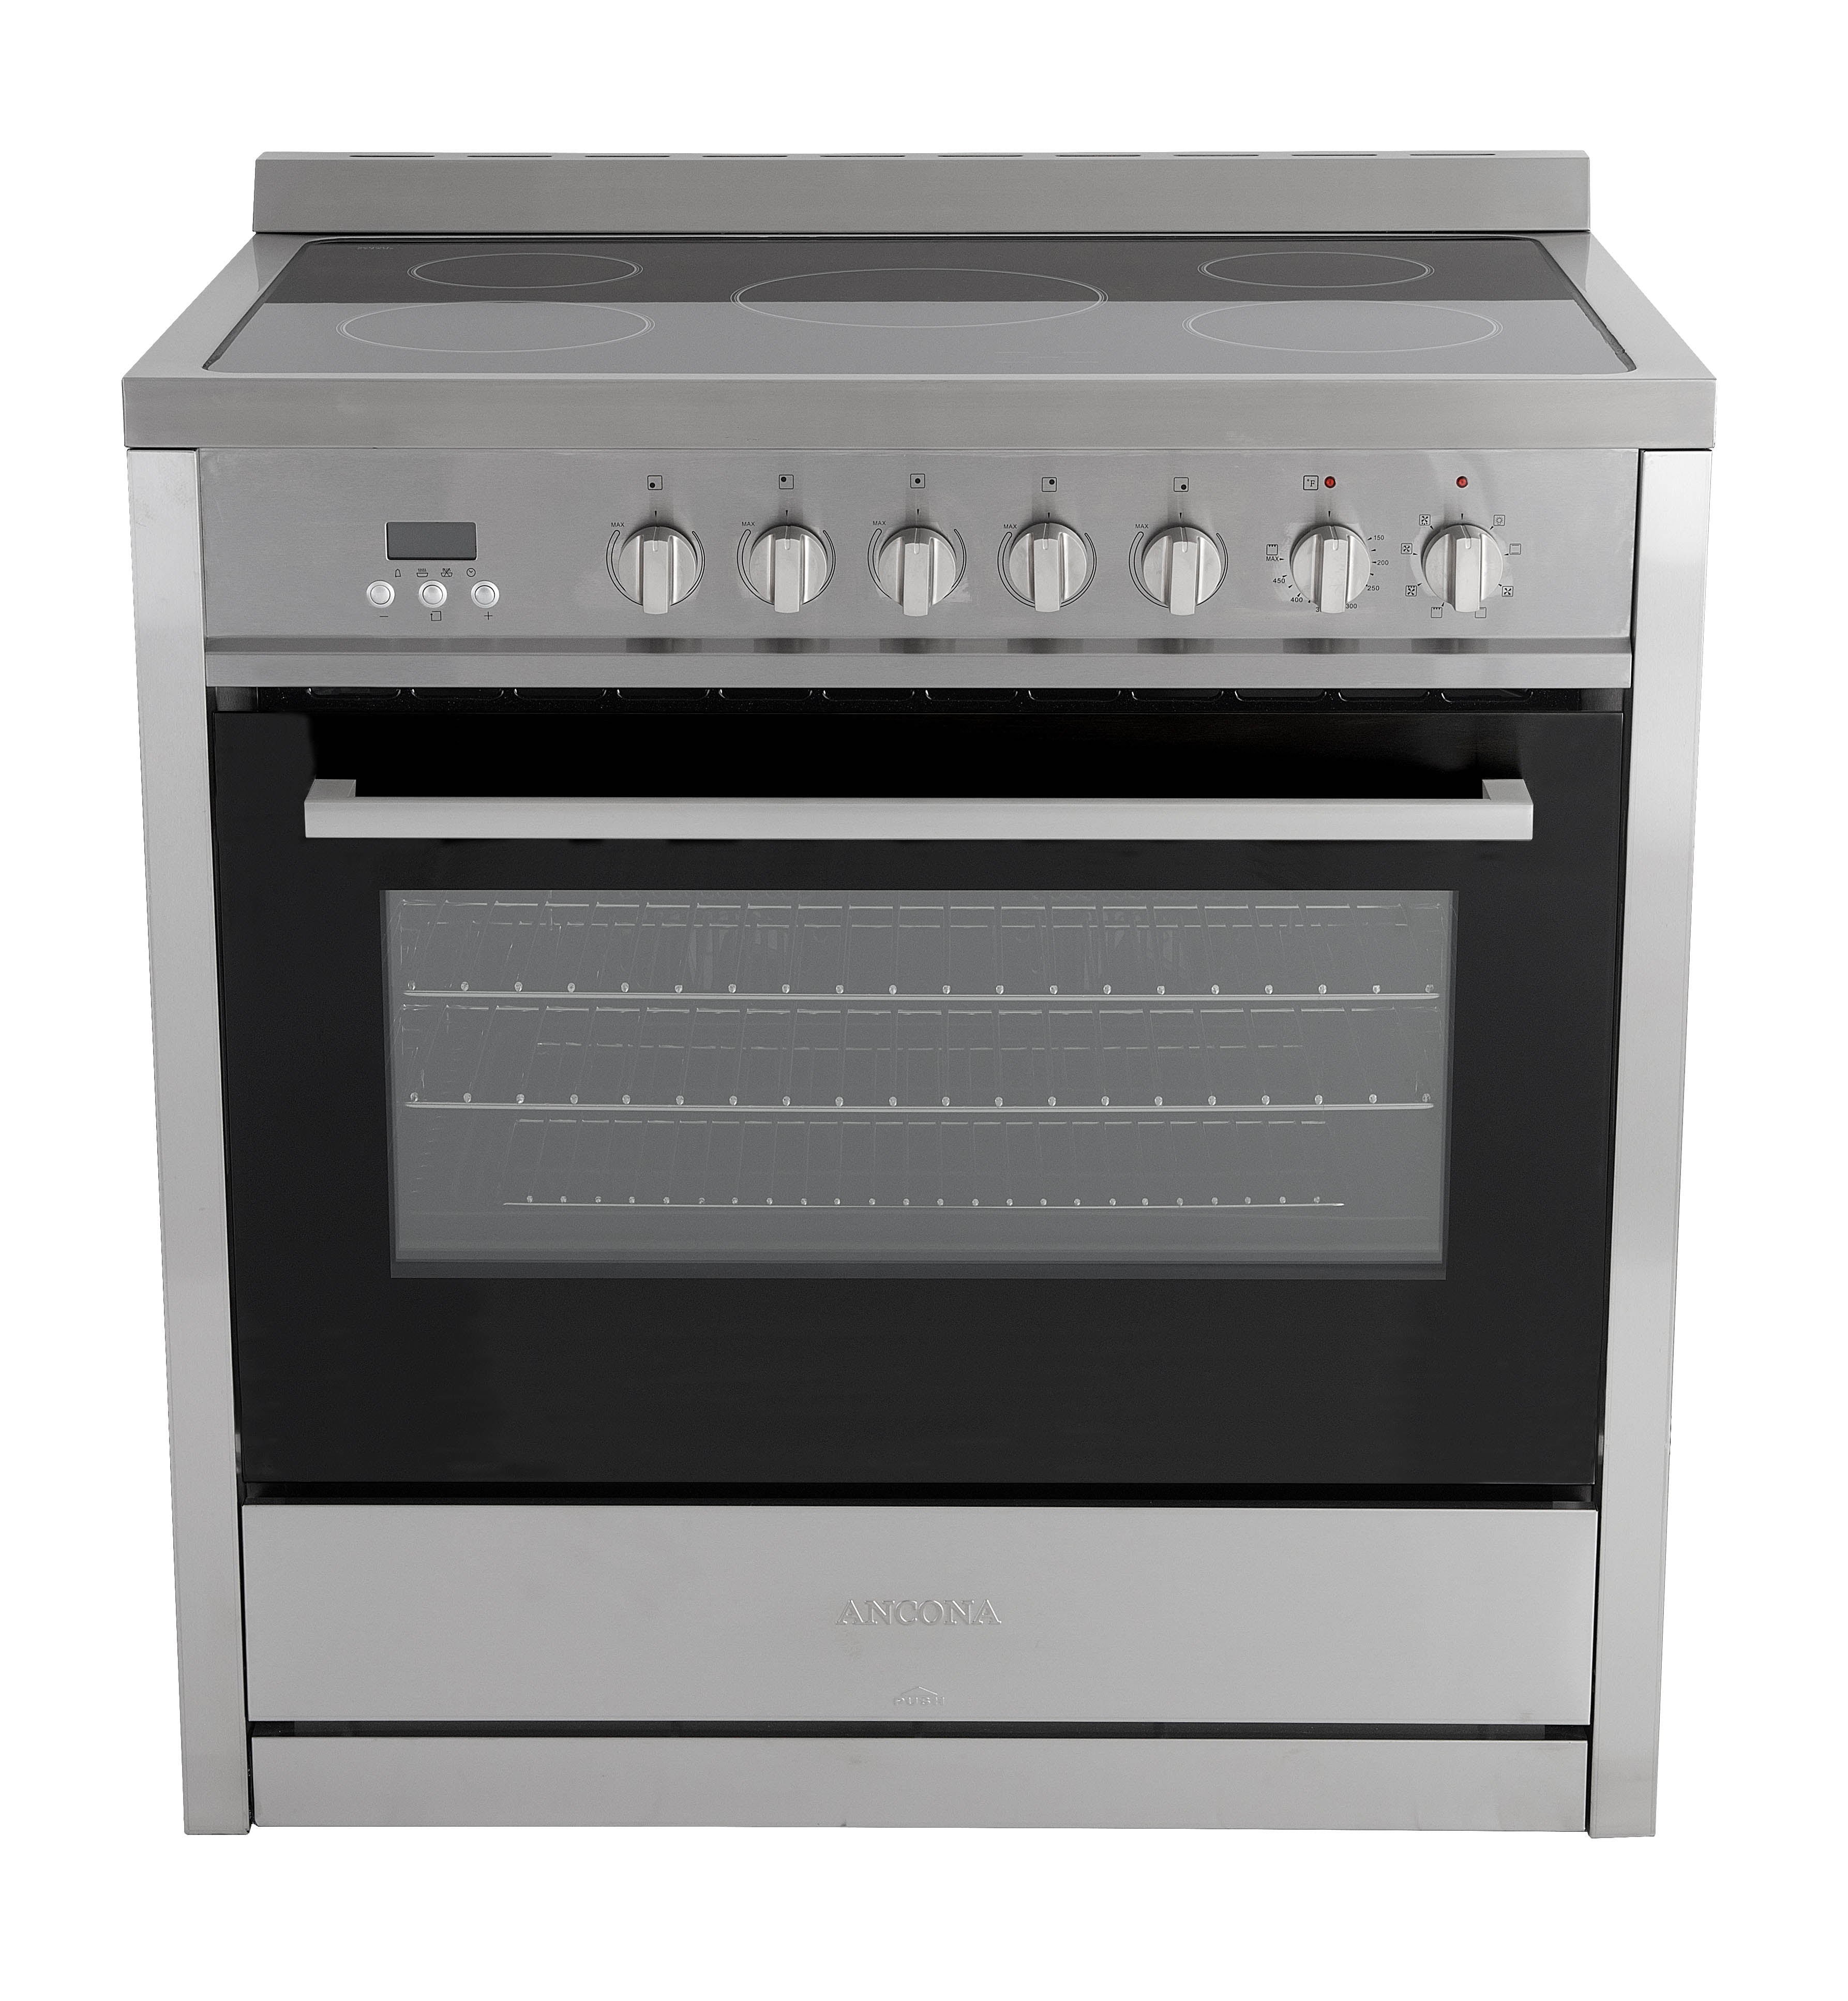 Gourmet 36 in. Vitroceramic with Convection Oven Freestanding Range